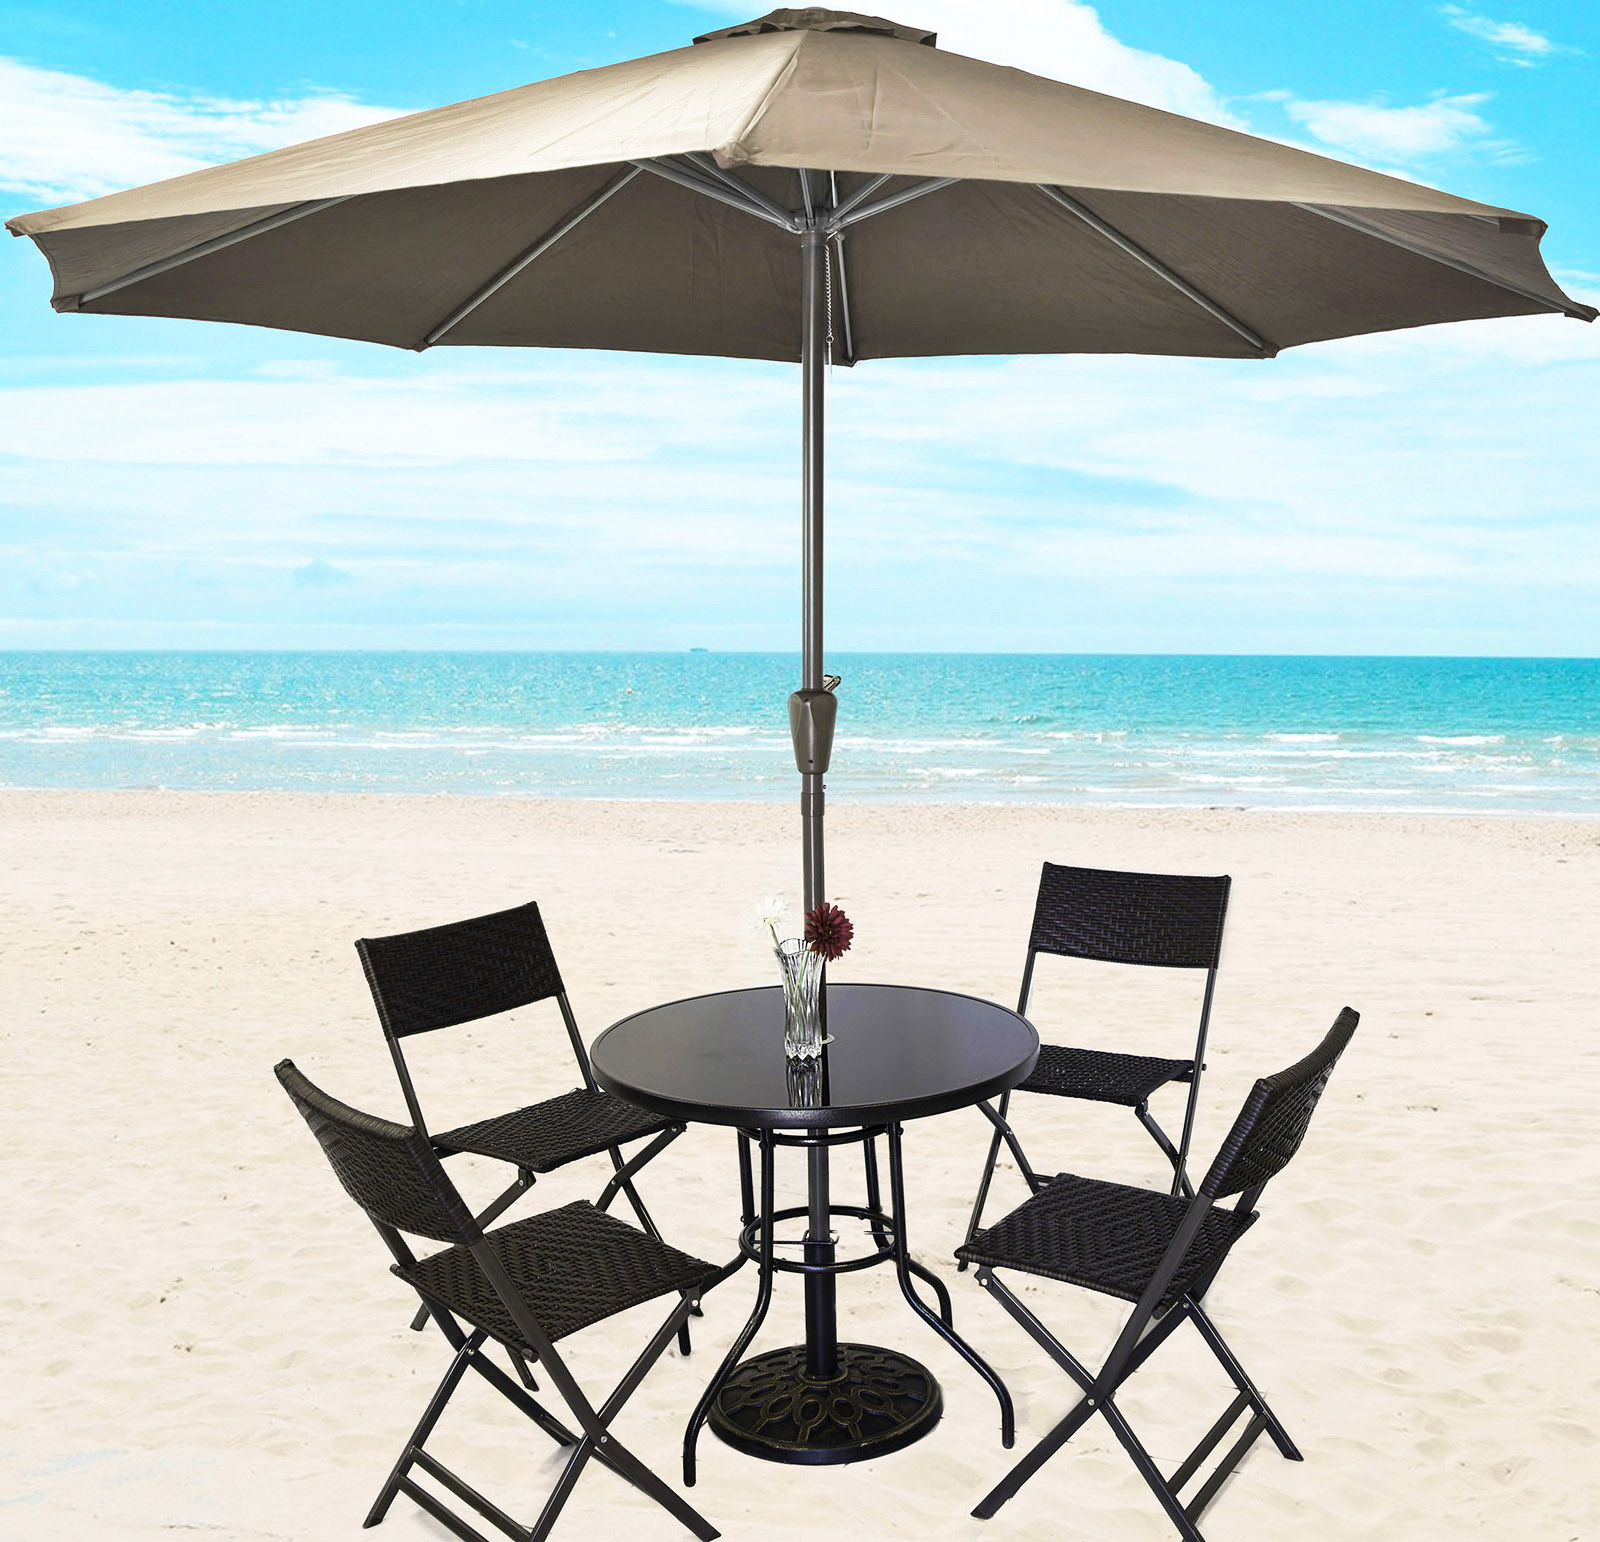 Alfresco 7 Piece Outdoor Setting (Beige Umbrella & Stand, 4 Rattan Chairs, Round Table)